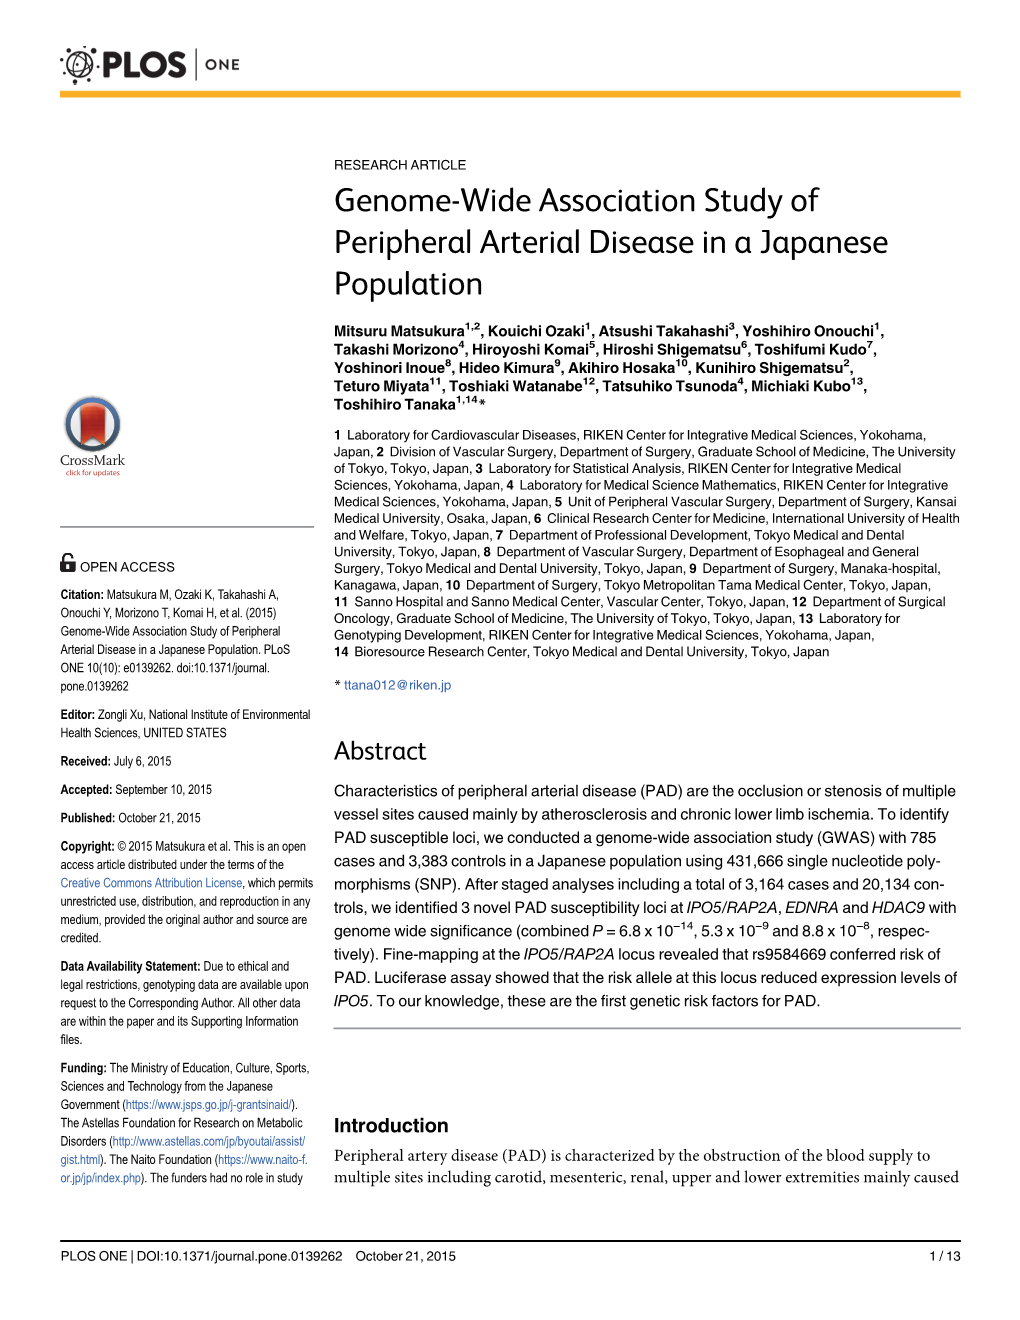 Genome-Wide Association Study of Peripheral Arterial Disease in a Japanese Population